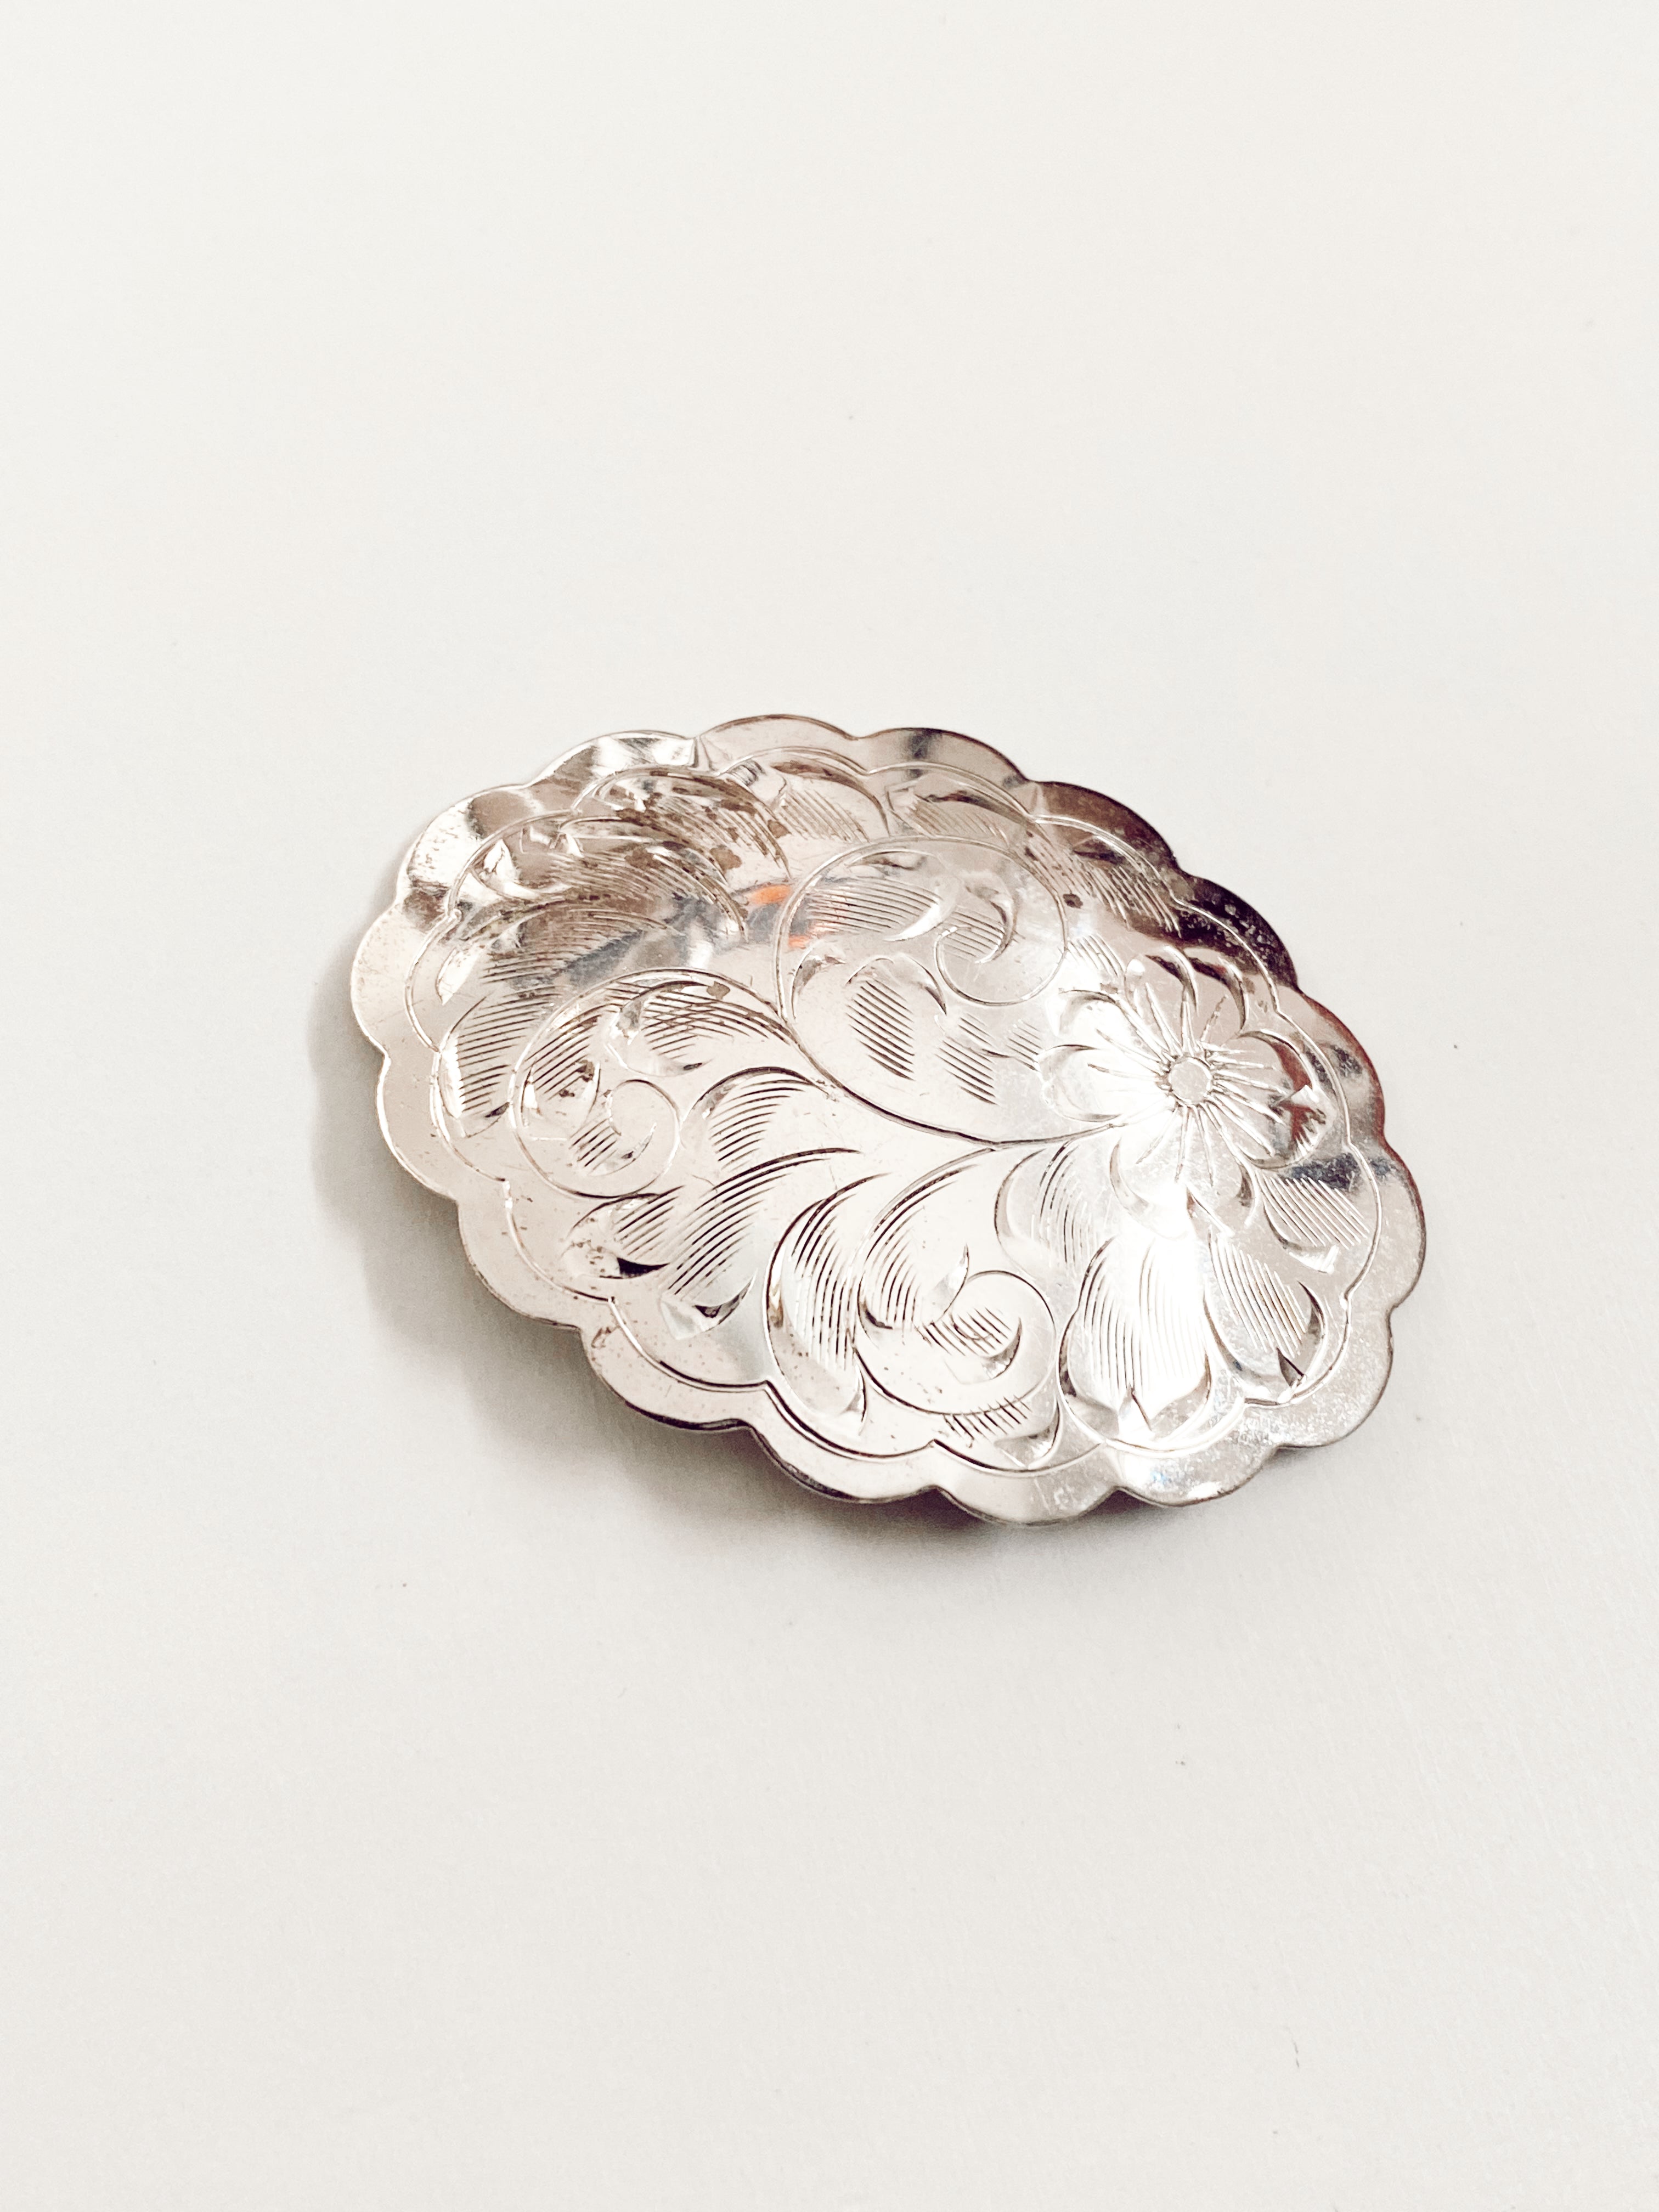 Silver Etched Brooch